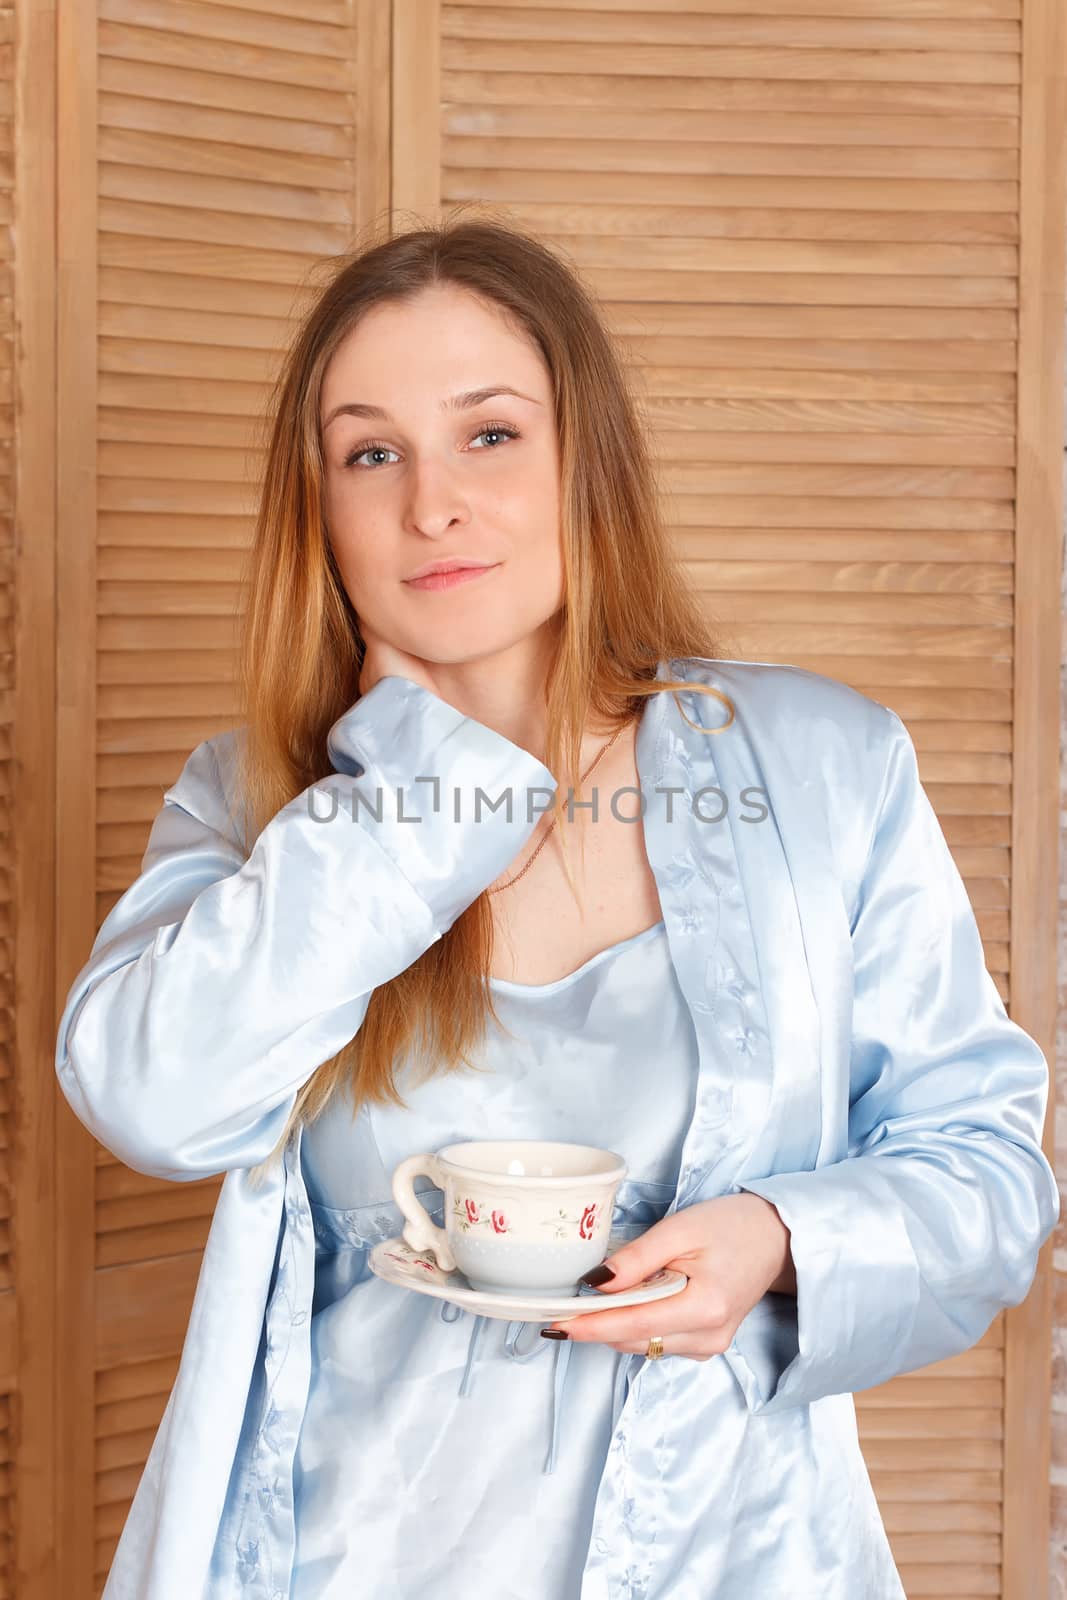 The  yawning woman is standing near window and holding cup